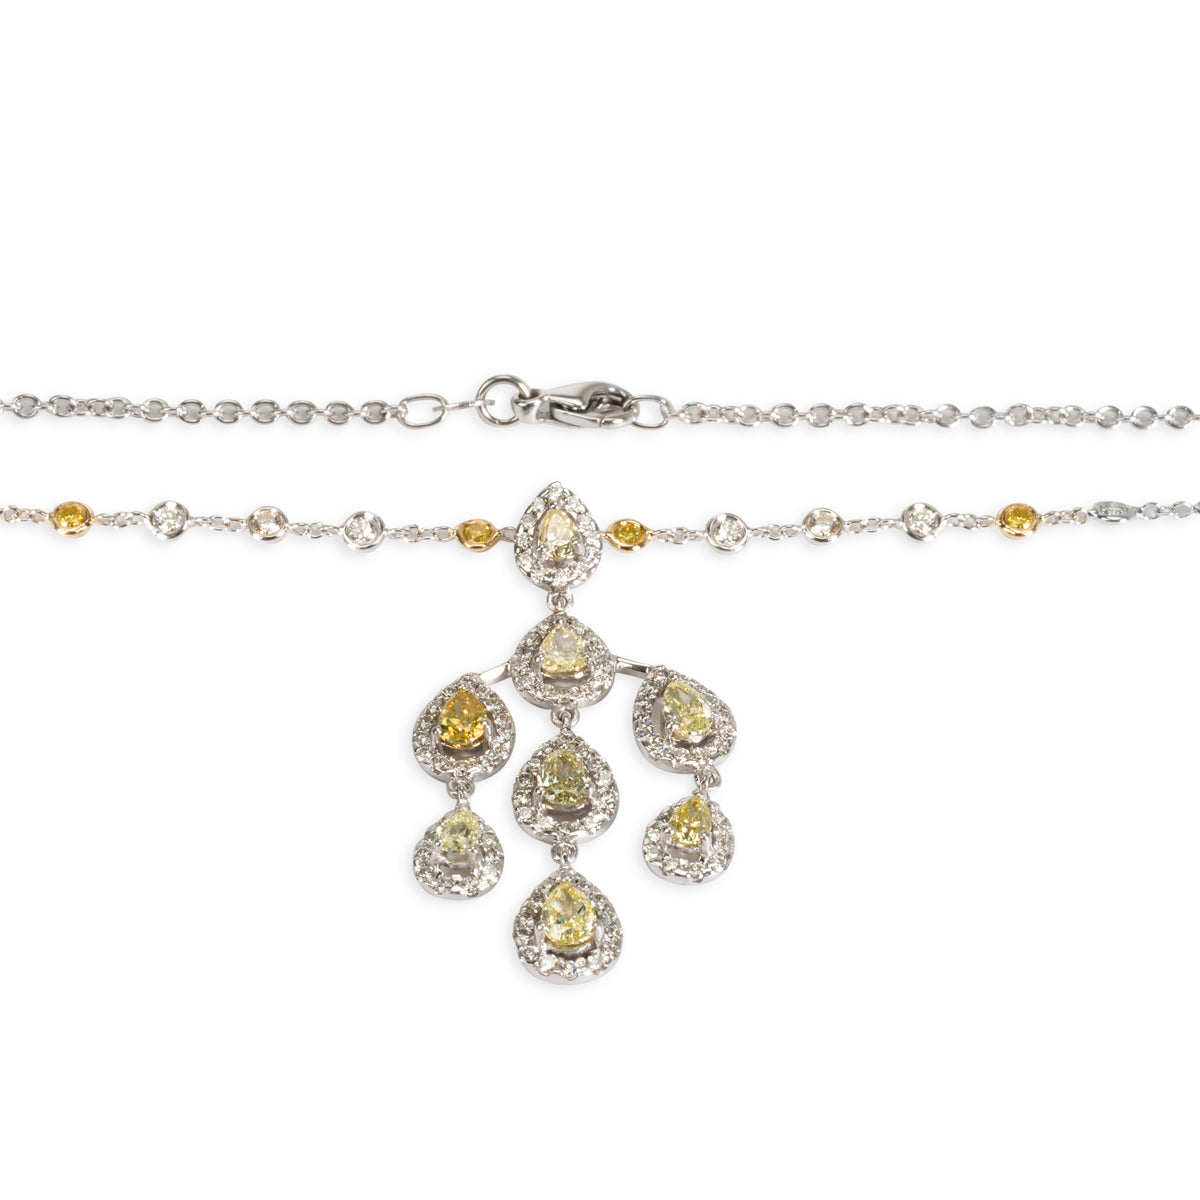 Gregg Ruth Fancy Yellow Diamond Necklace in 18K White Gold 2.71 CTW